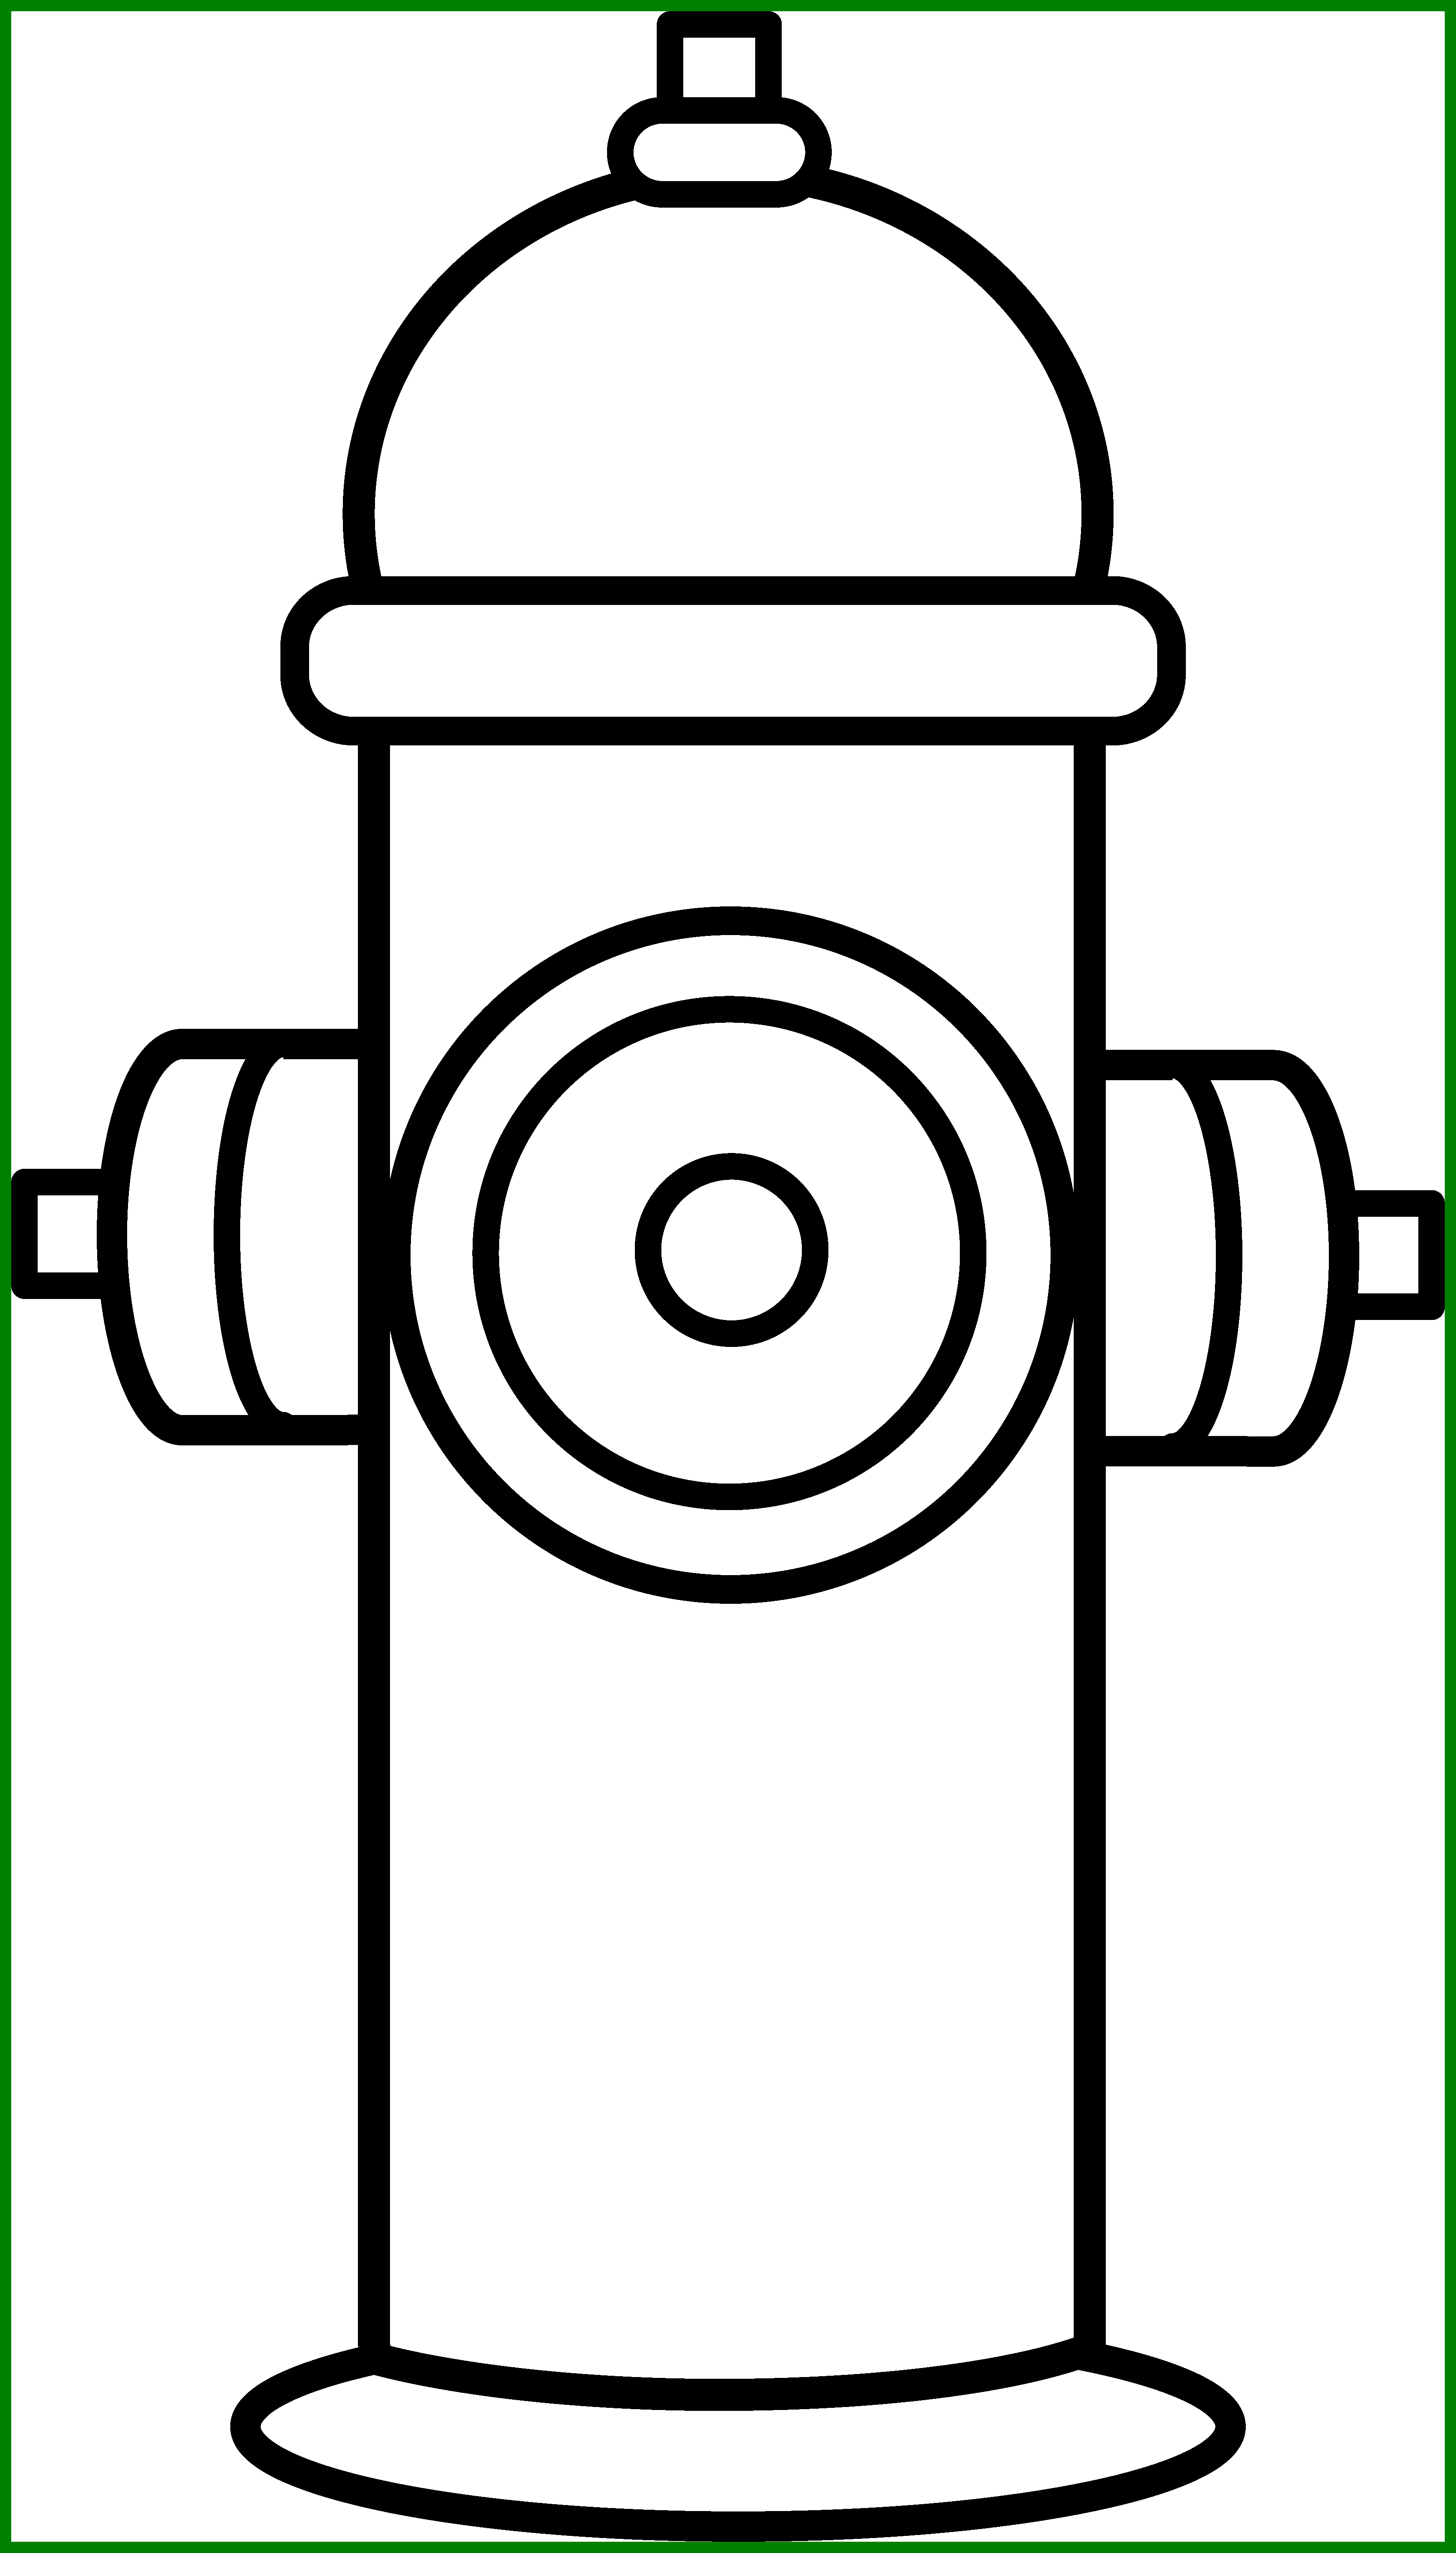 Fascinating fire hydrant clip. Firefighter clipart hose clipart